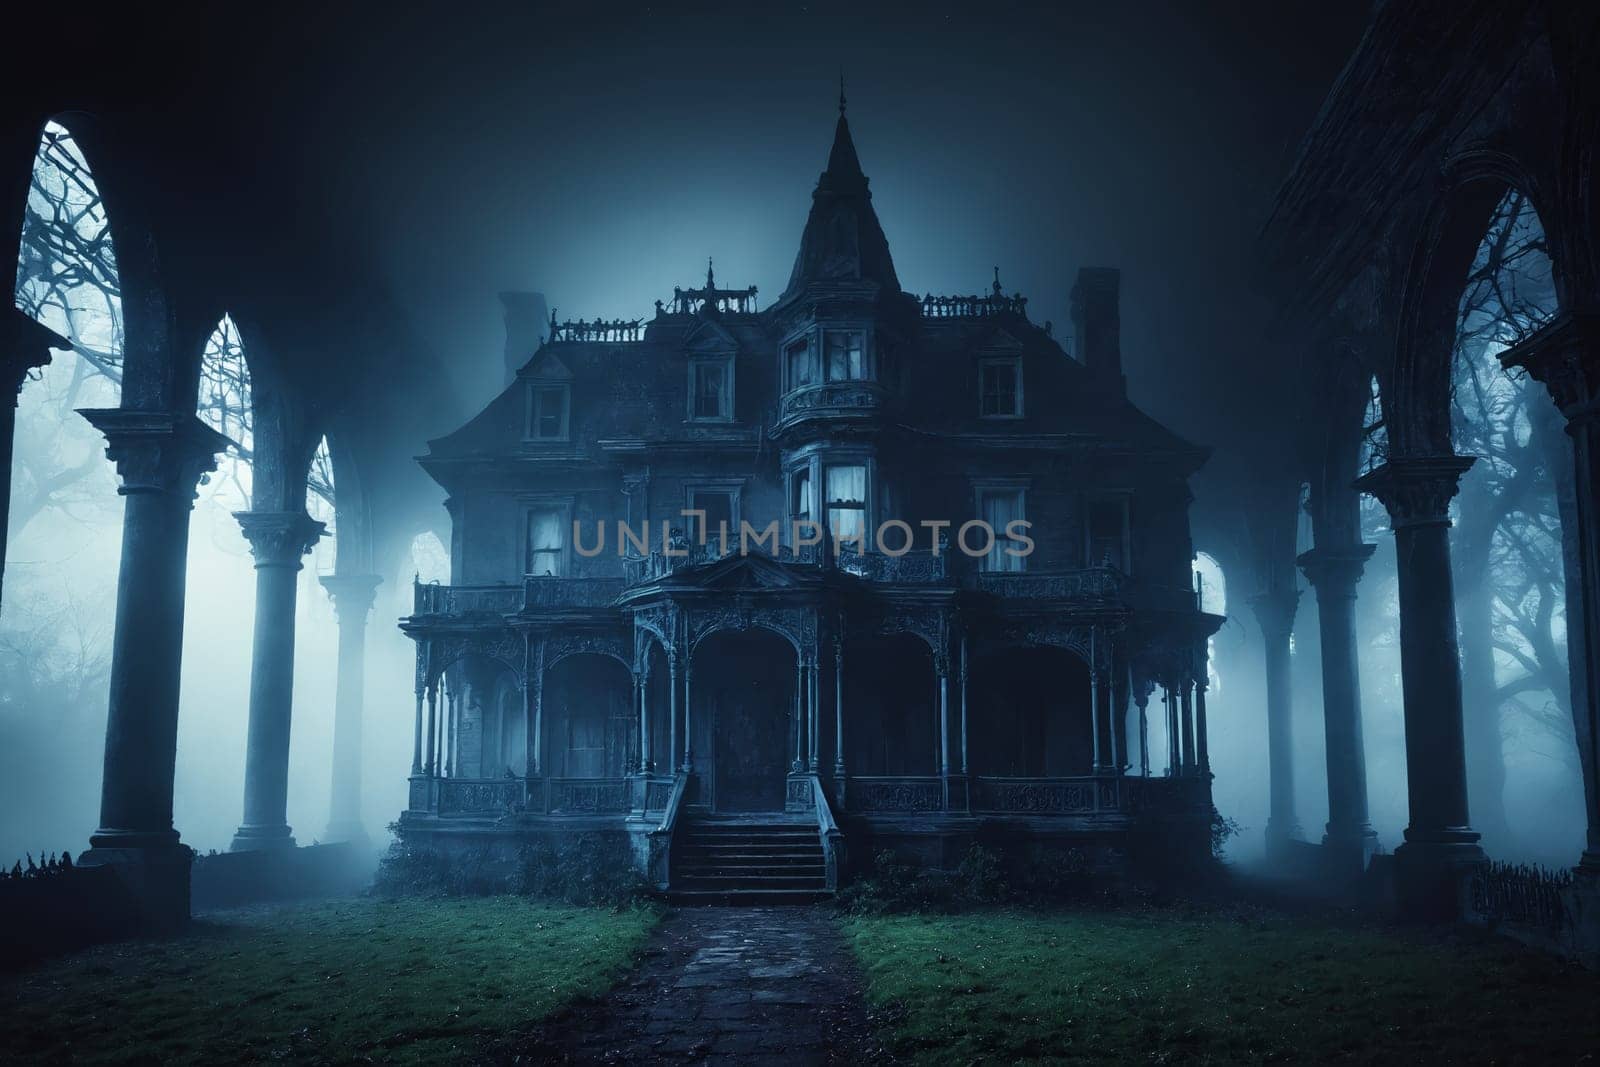 The eerie ambiance of a seemingly abandoned mansion, shrouded in fog, adds a haunting beauty to the scene. A single illuminated window hints at untold stories of its past.